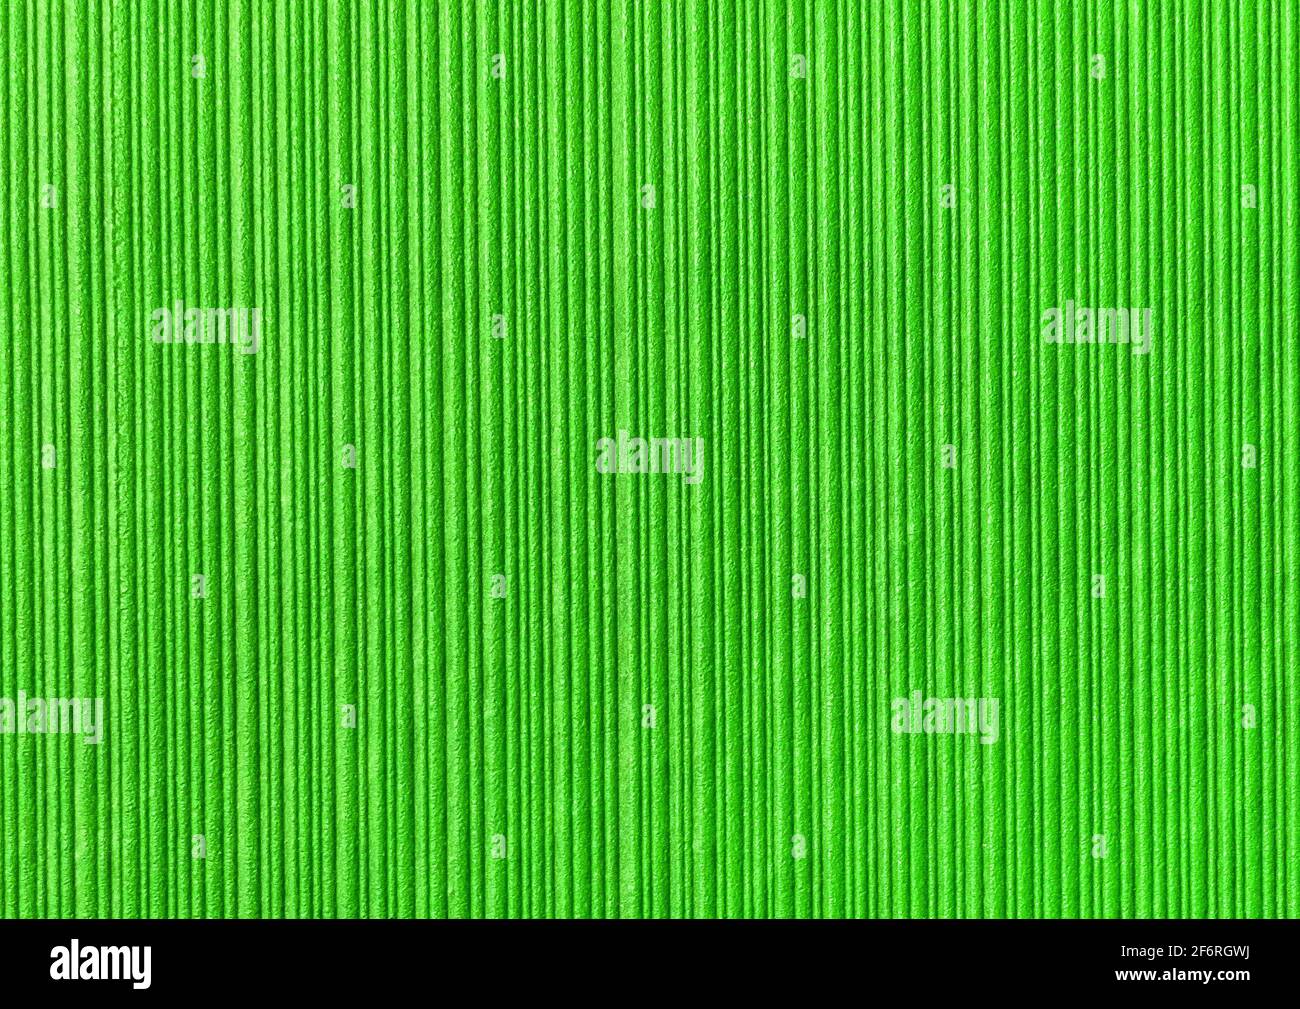 Green abstract striped pattern wallpaper background, paper texture with vertical lines. Stock Photo